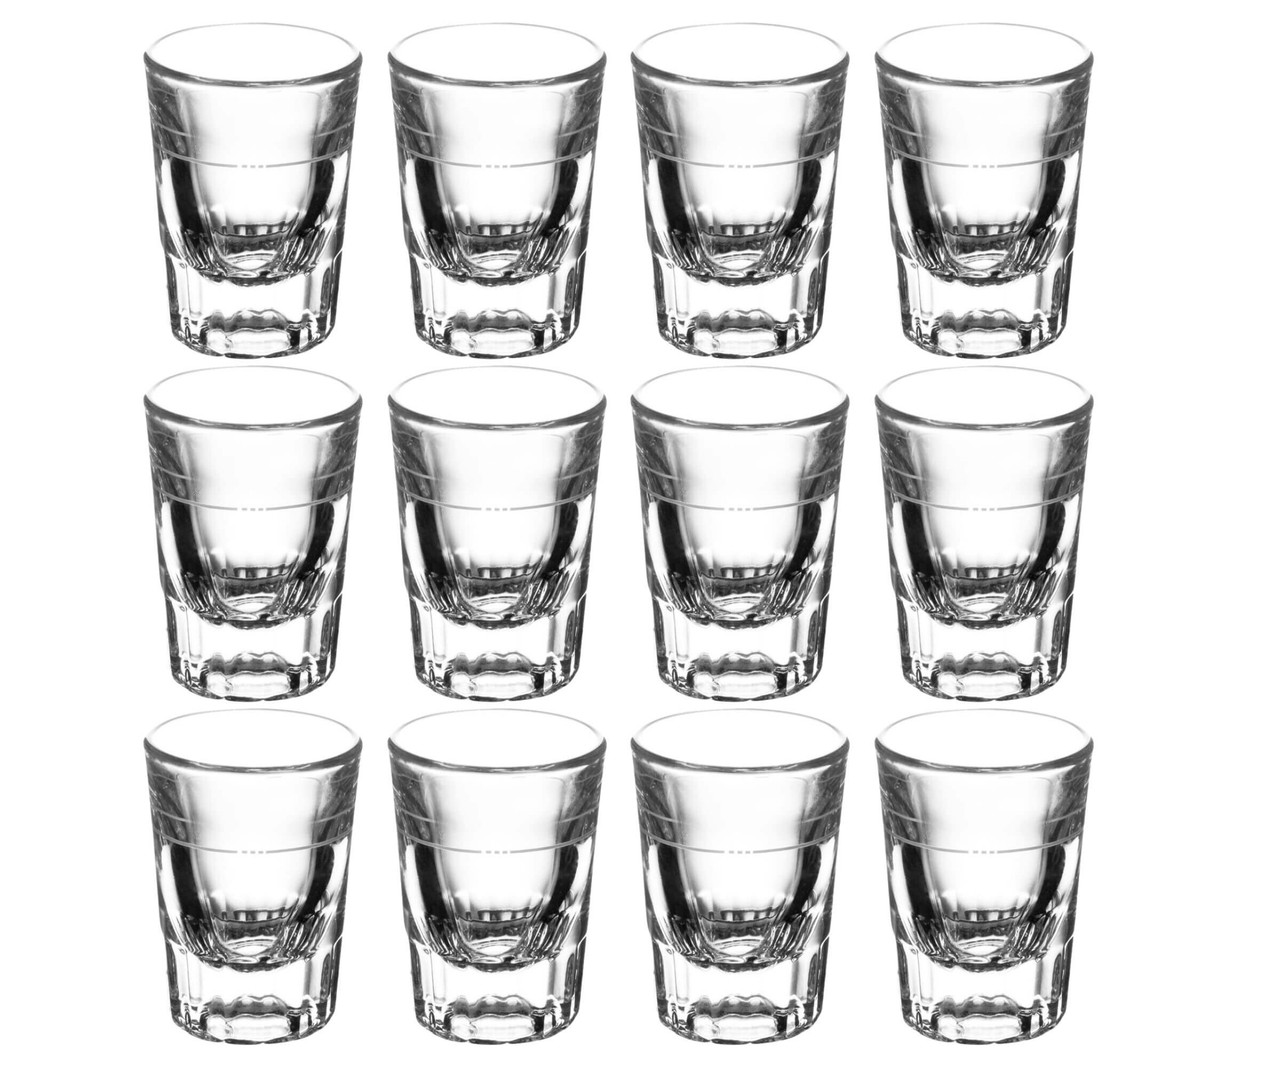 Libbey Pack of 12 Fluted Shot Glasses - 1.5 oz. with .875 oz. Pour Line-Chicken Pieces